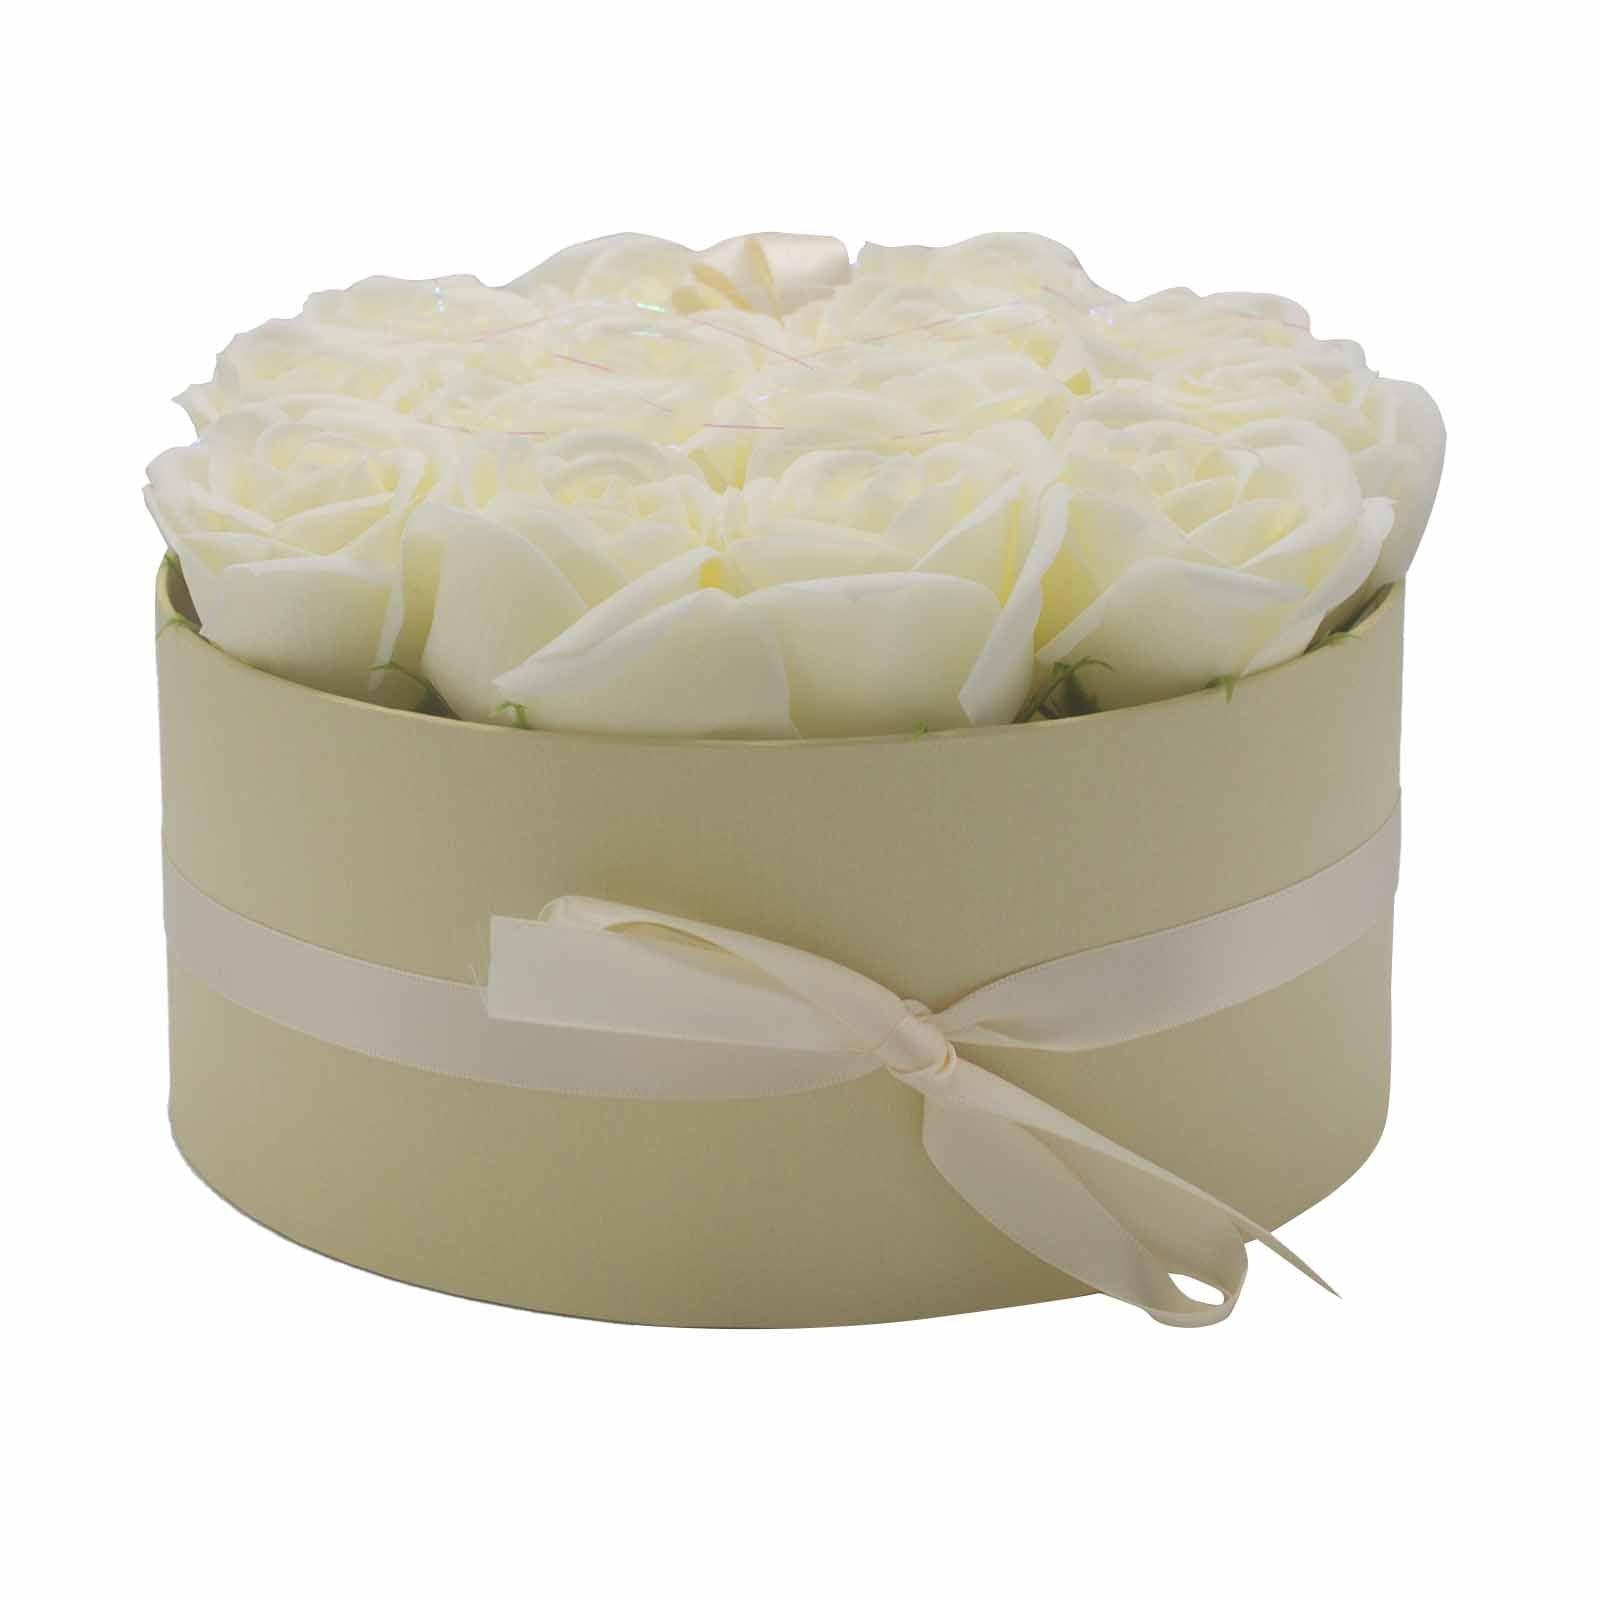 Soap Flower Gift Bouquet - 14 Cream Roses - Round - Charming Spaces